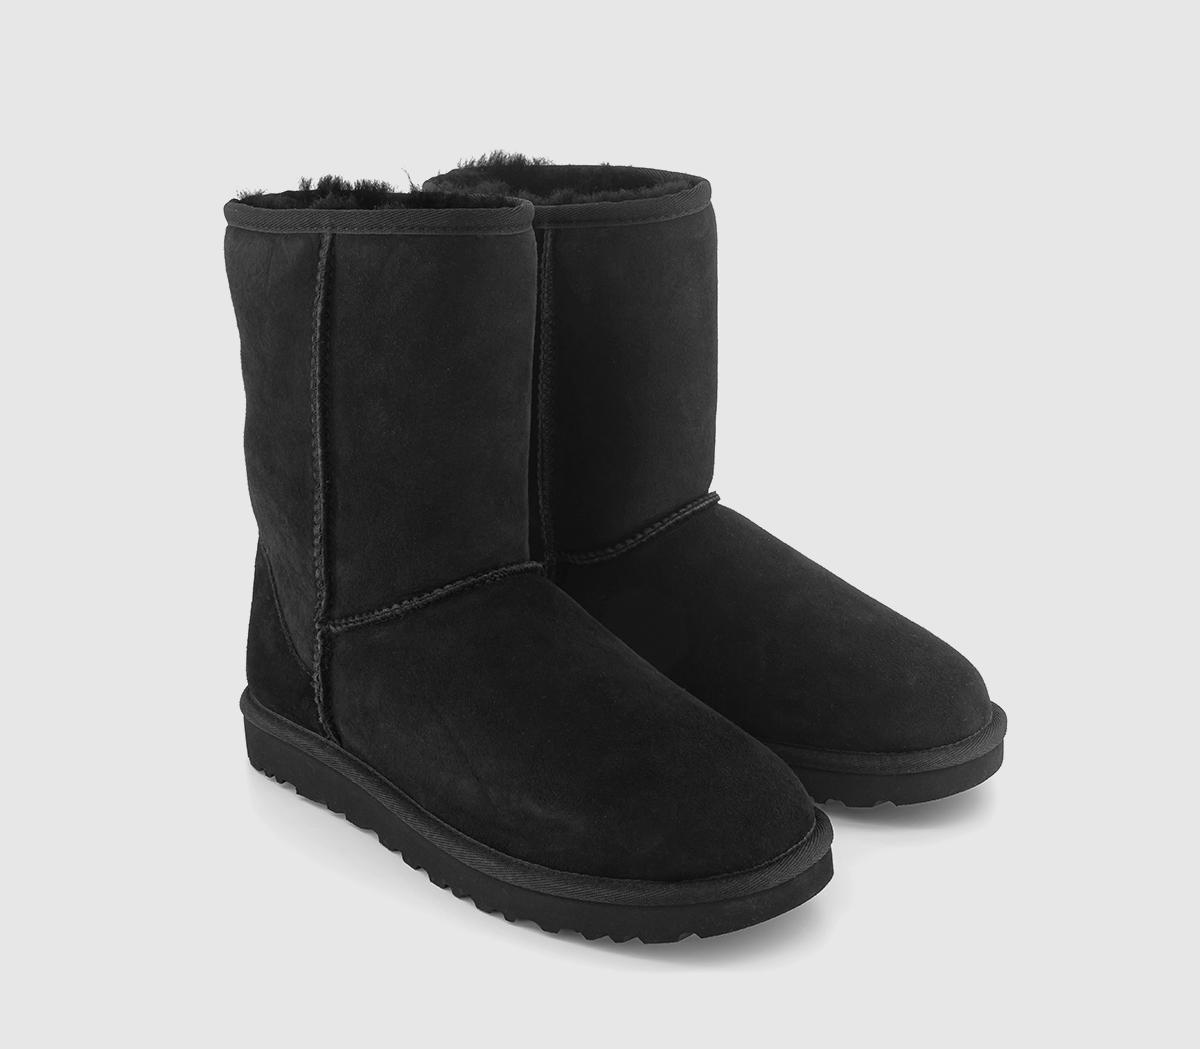 UGG Womens Black Suede Classic Short Ii Boots, 6